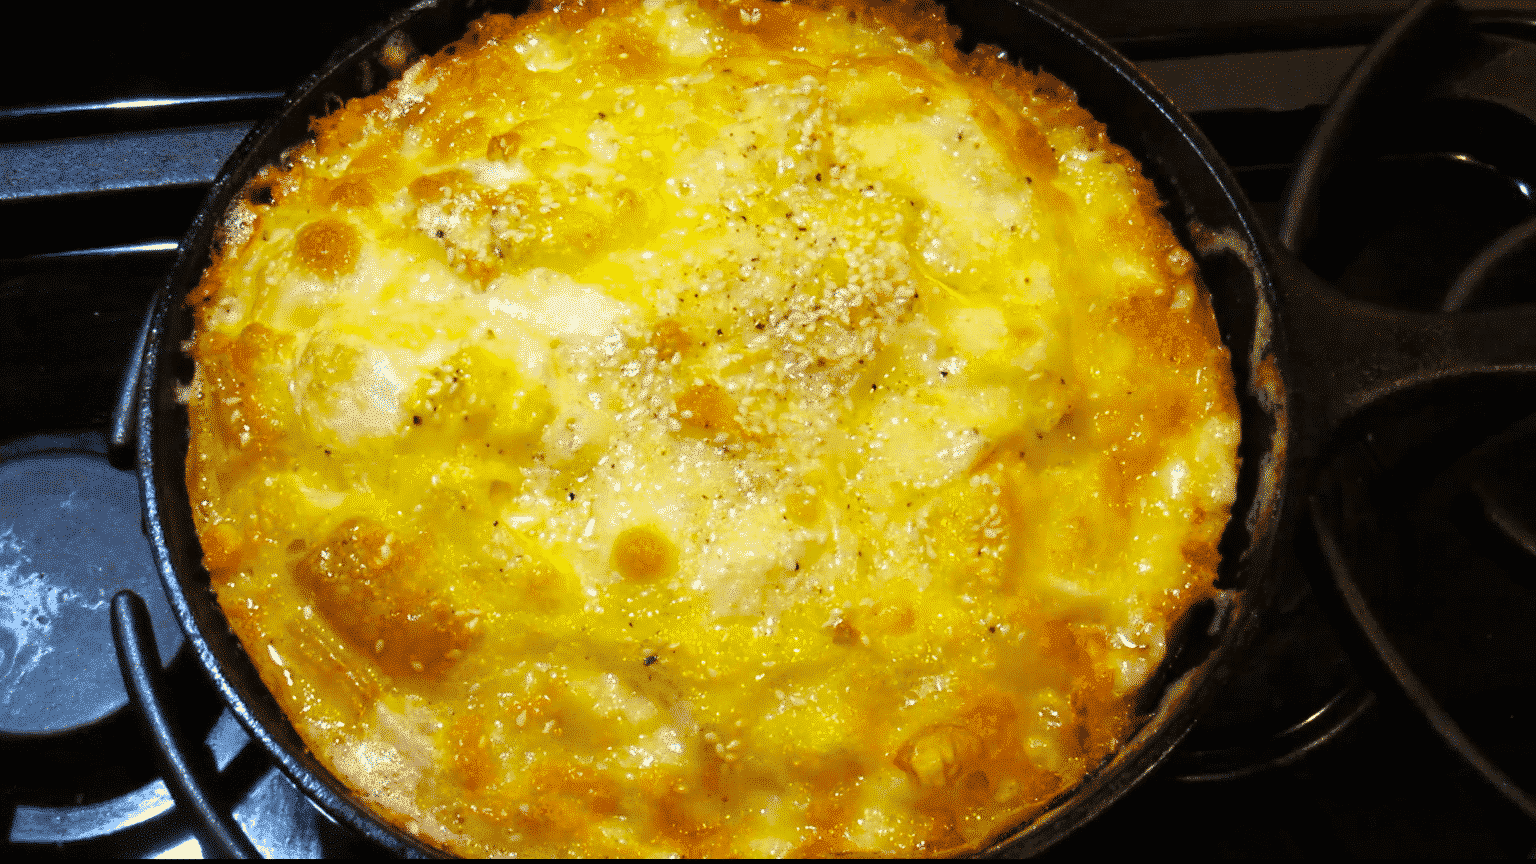 Sourdough starter, egg and cheese breakfast casserole skillet baked in the oven ready to serve.